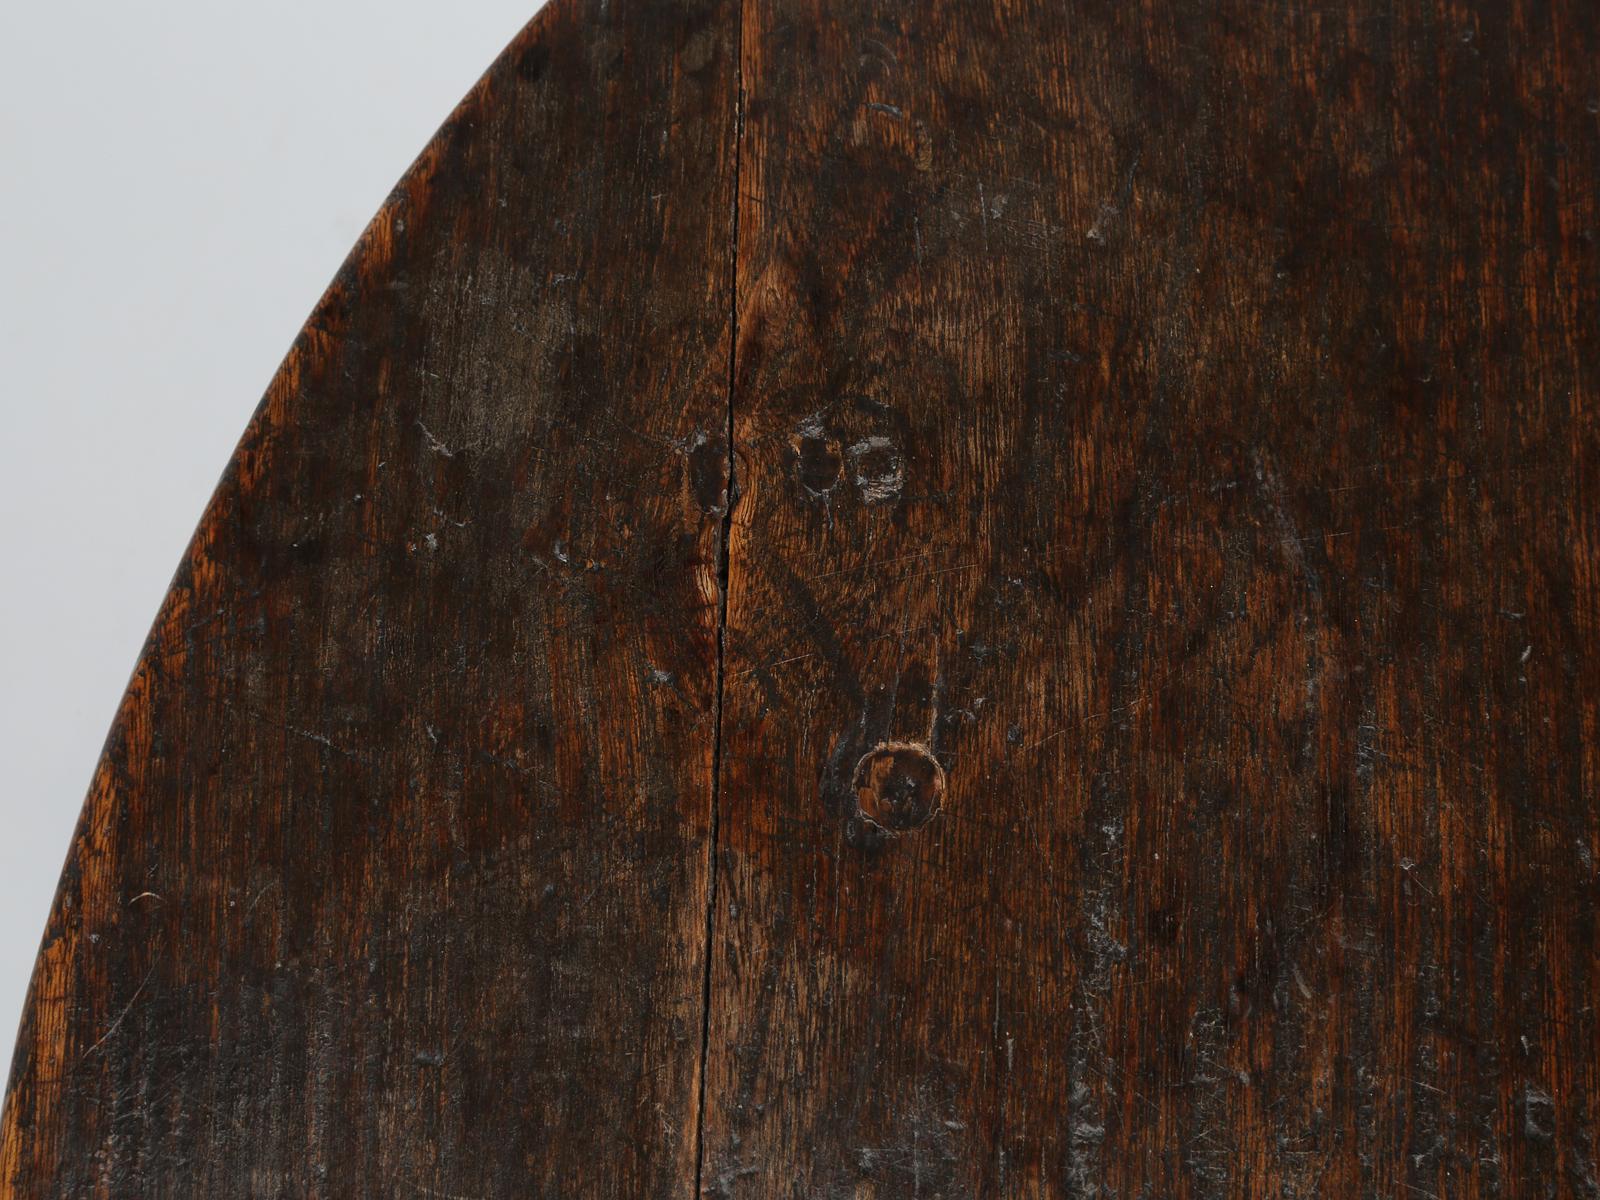 Hand-Crafted Antique English Cricket Table with a Great Original Patina, circa 1800s